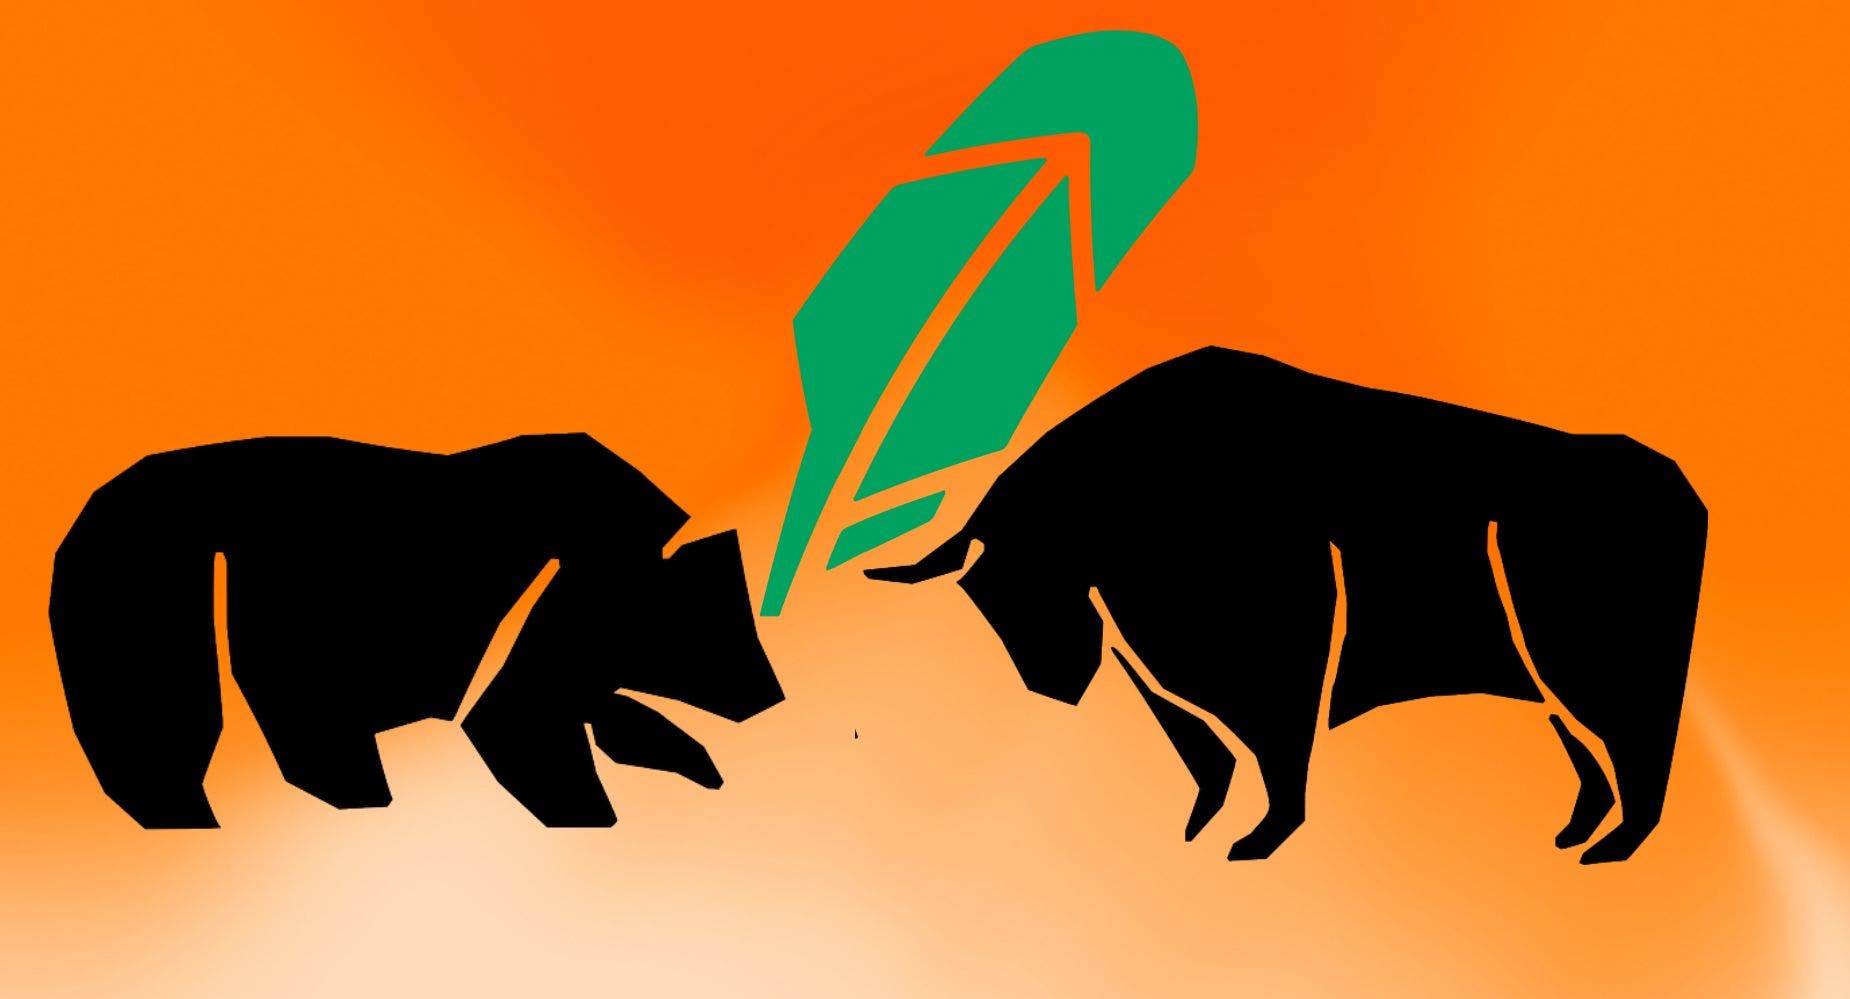 Bears Lick Their Chops Over Robinhood's Stock, Here's Where The Bulls Could Step In